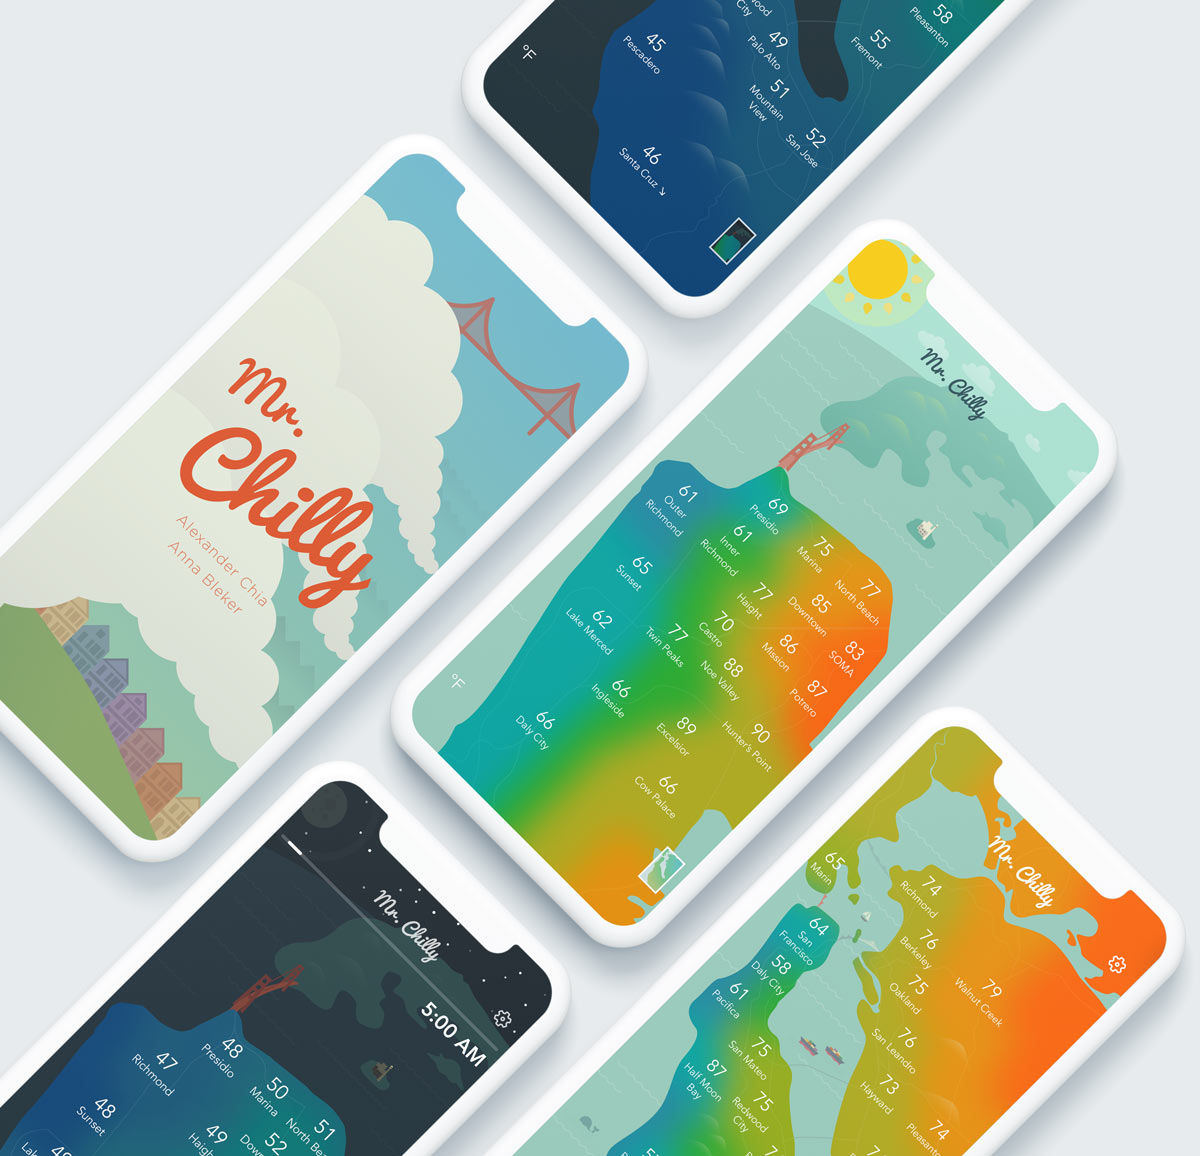 A bunch of the colorful Mr. Chilly app screens